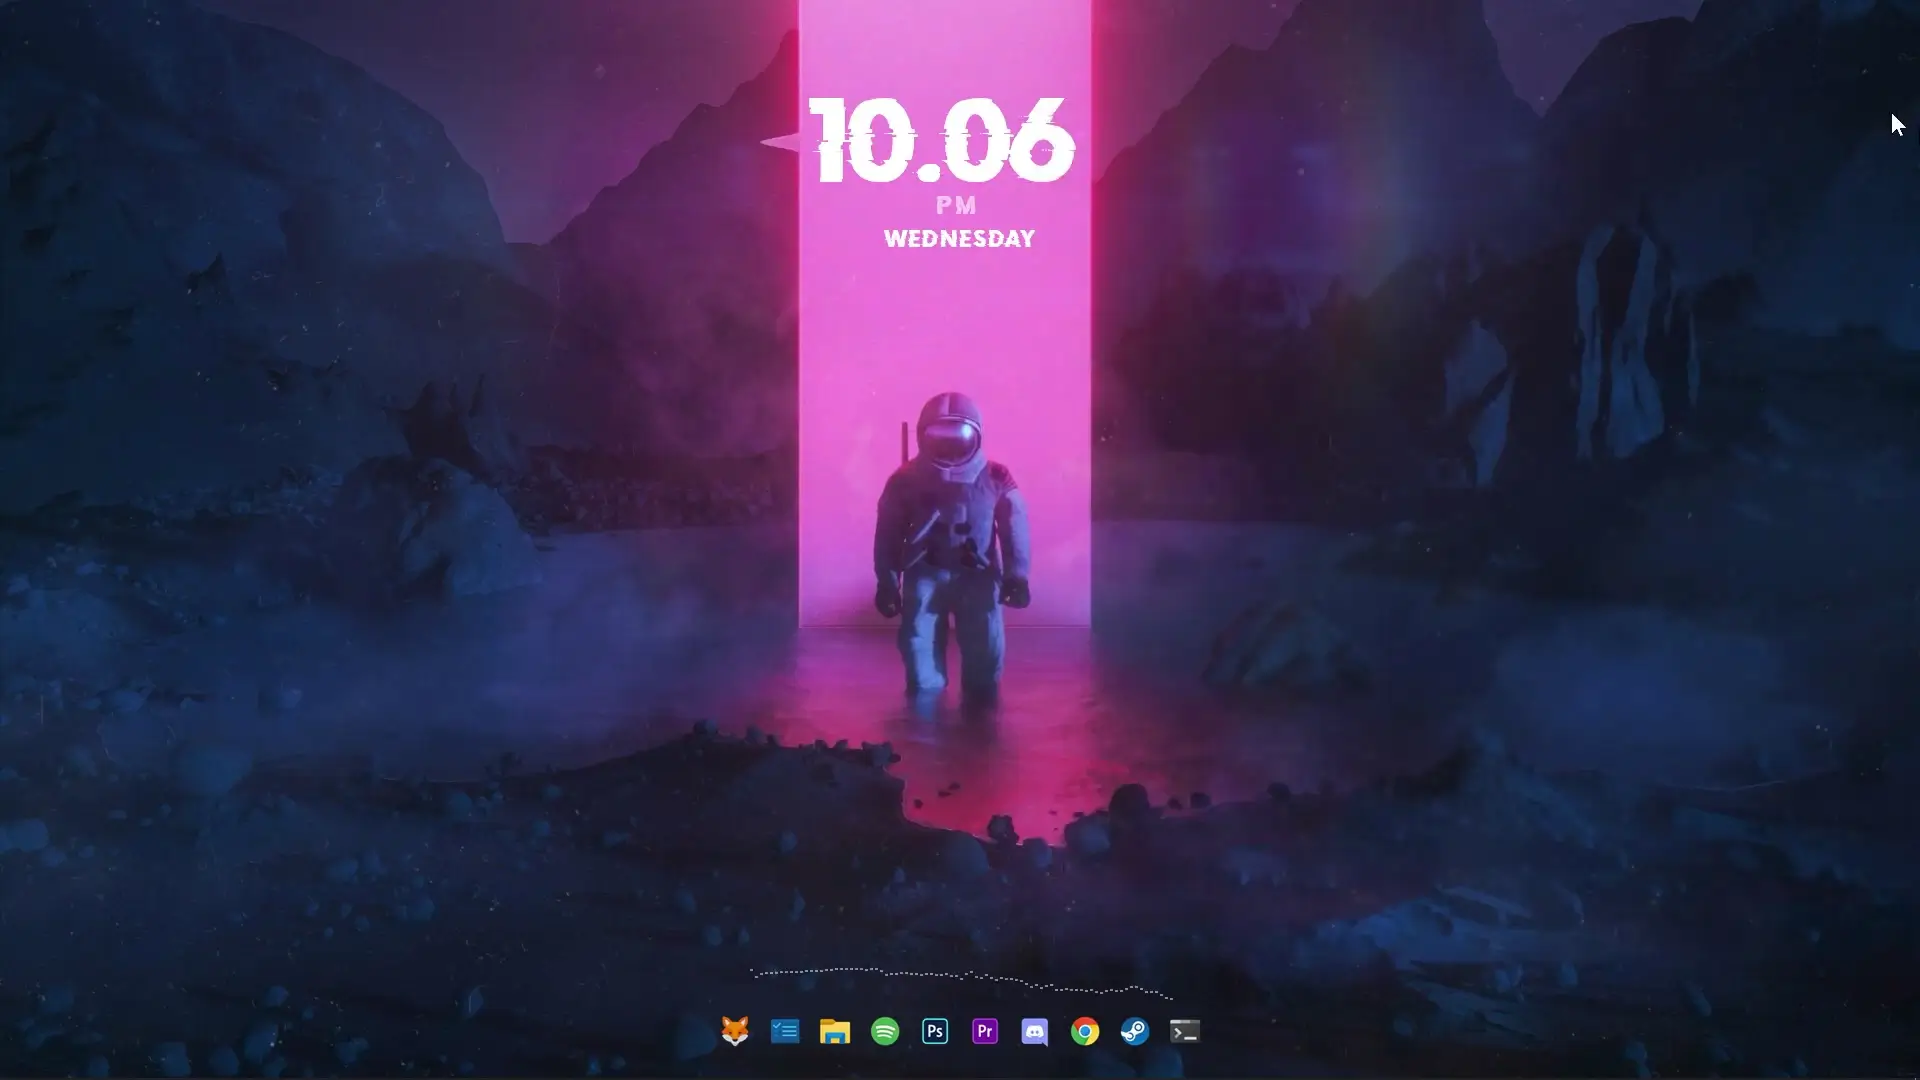 Give Your Desktop a New and Unique Look